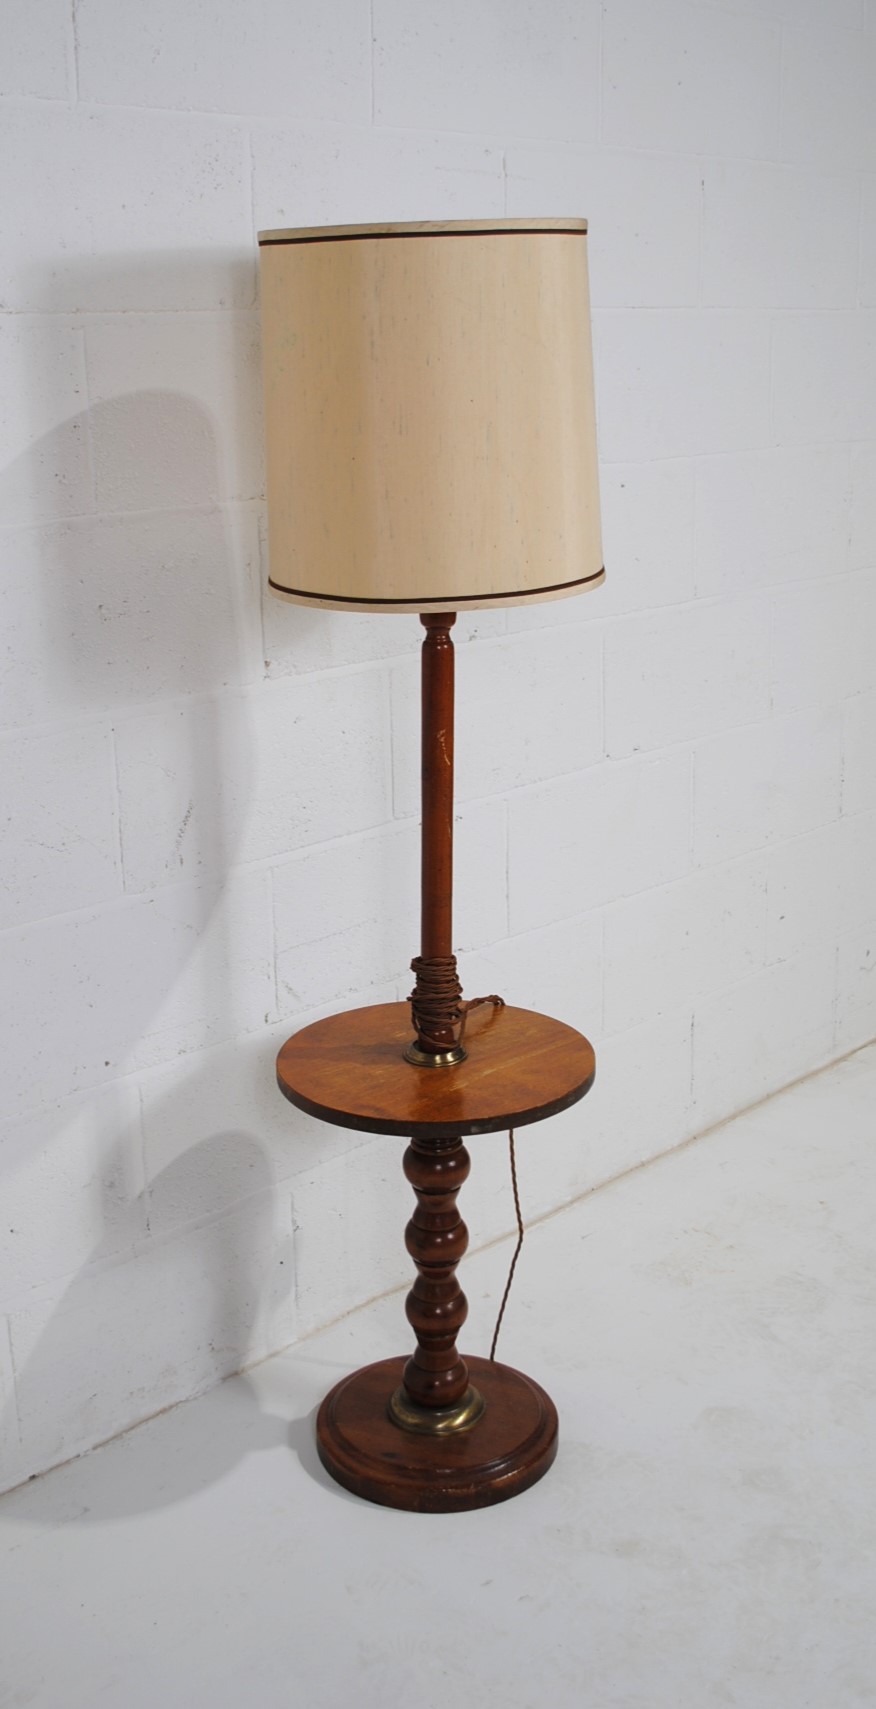 A wooden standard lamp with table base - Image 2 of 3